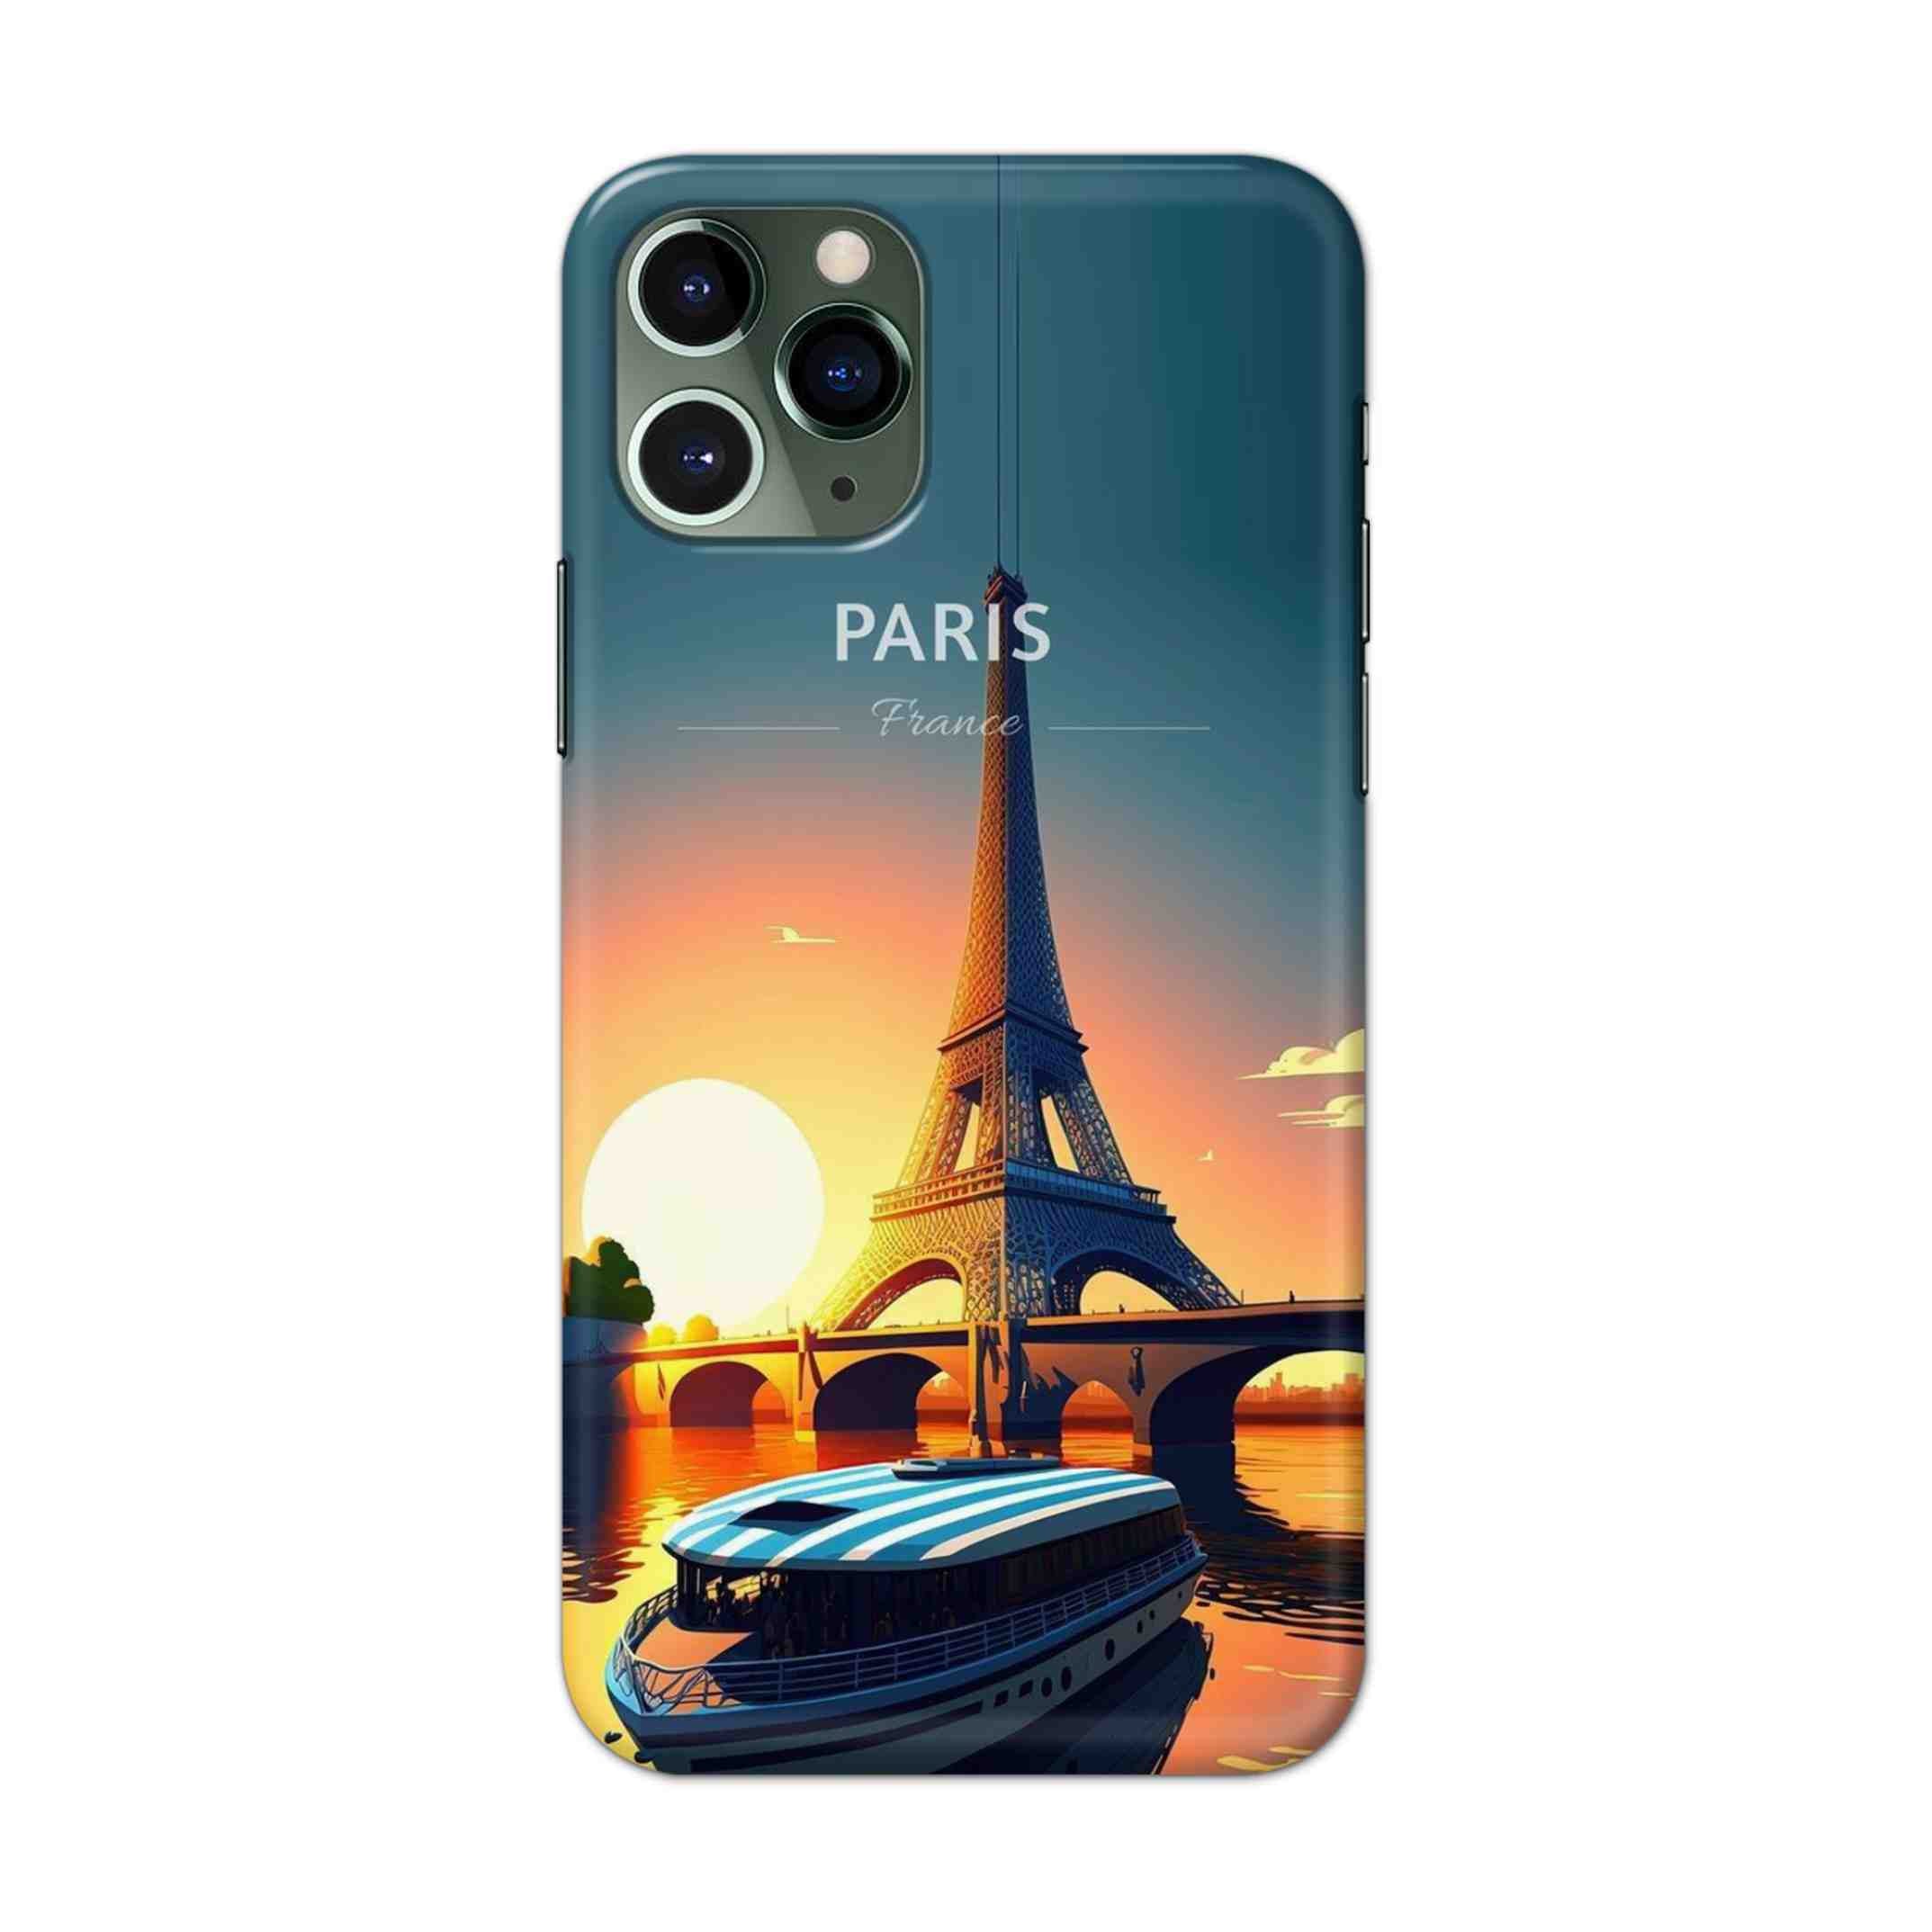 Buy France Hard Back Mobile Phone Case/Cover For iPhone 11 Pro Online